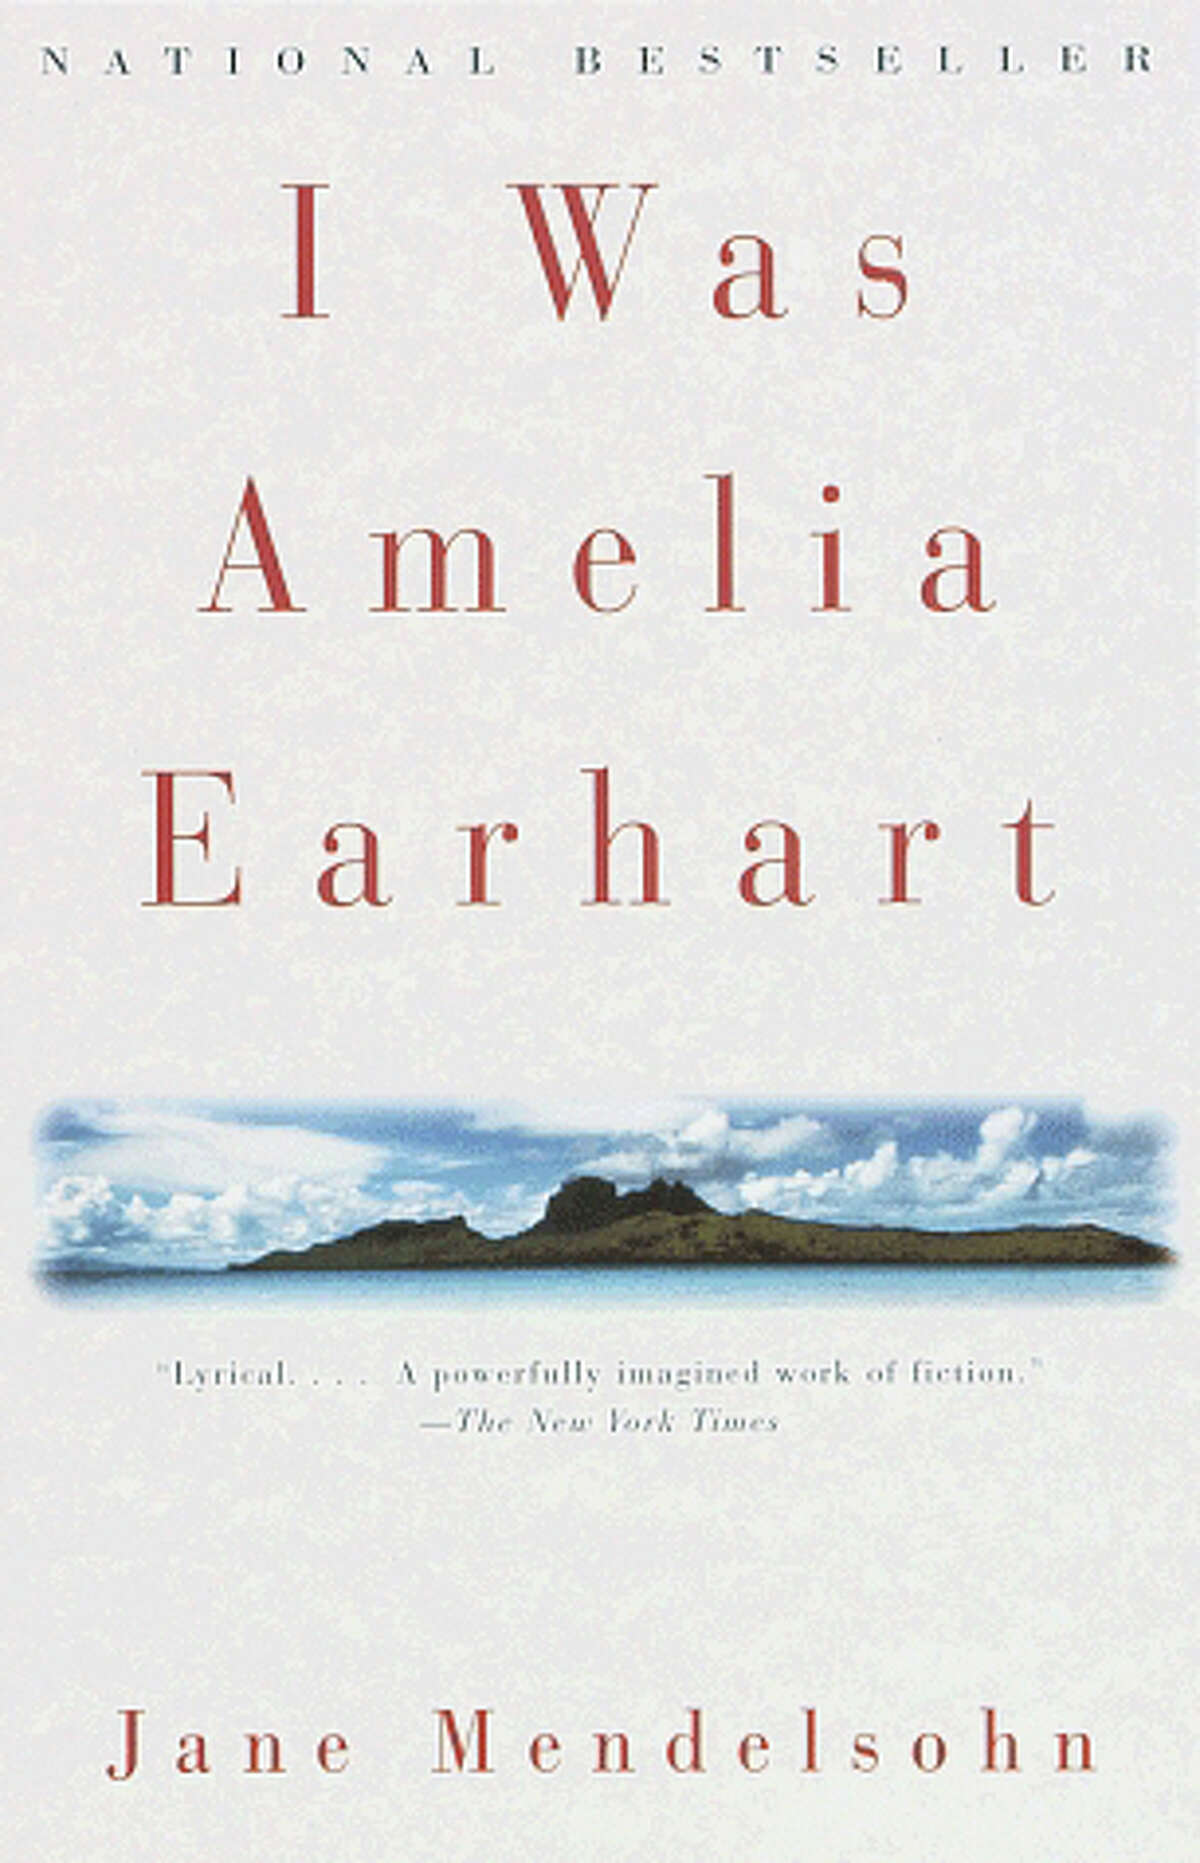 Above is the book cover to "I was Amelia Earhart" by Jane Mendelsohn. She will discuss the book Wednesday, Jan. 11, at Westport Public Library.